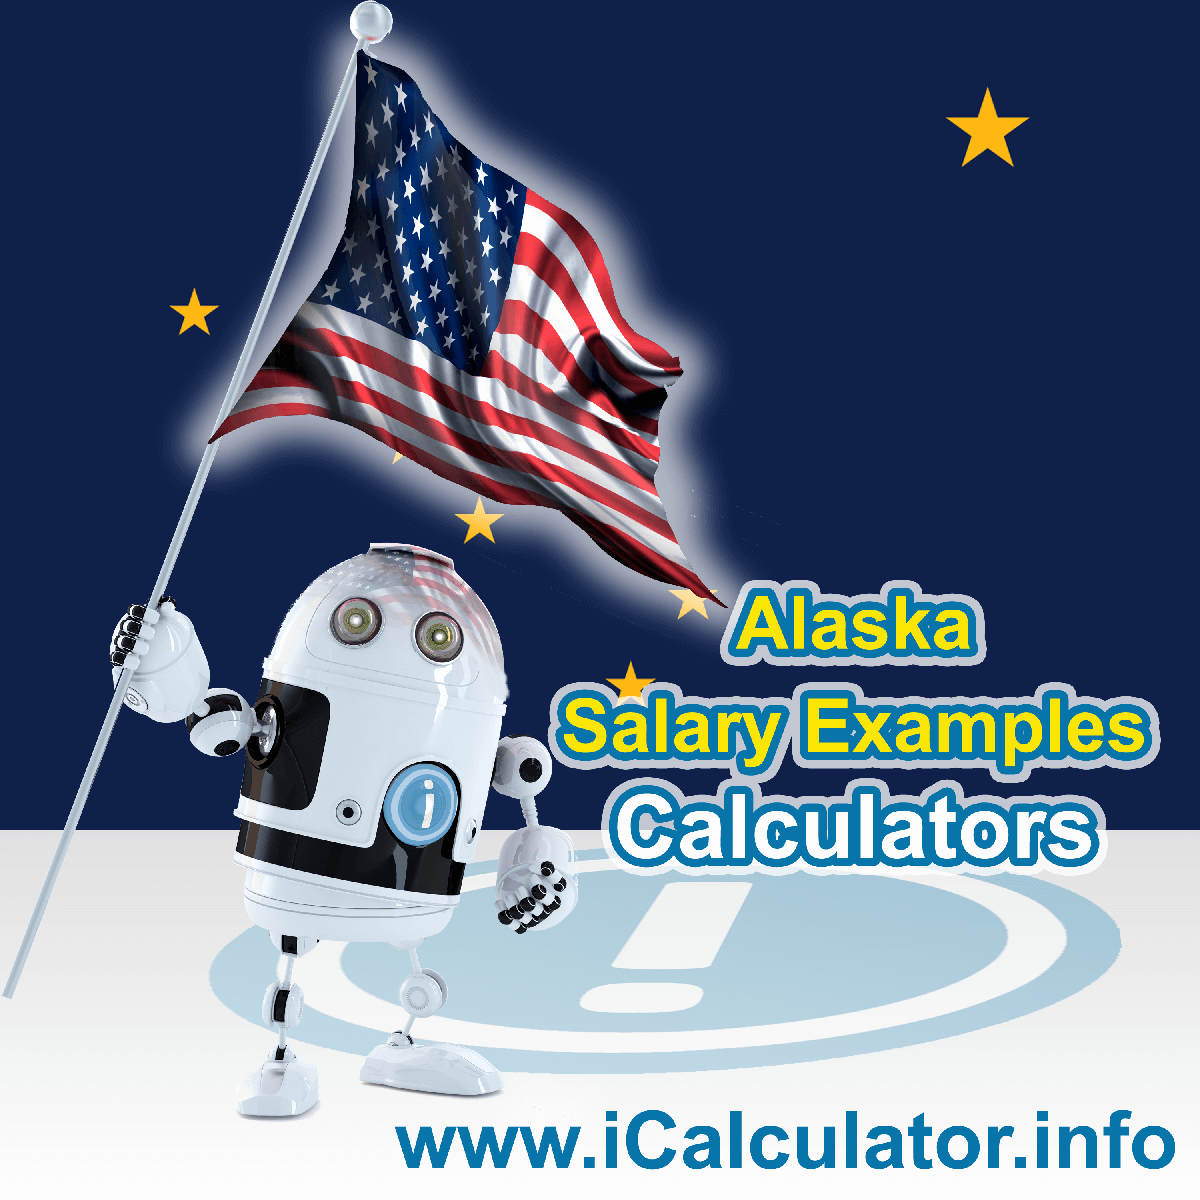 Alaska Salary Example for $ 200,000.00 in 2023 | iCalculator™ | $ 200,000.00 salary example for employee and employer paying Alaska State tincome taxes. Detailed salary after tax calculation including Alaska State Tax, Federal State Tax, Medicare Deductions, Social Security, Capital Gains and other income tax and salary deductions complete with supporting Alaska state tax tables 